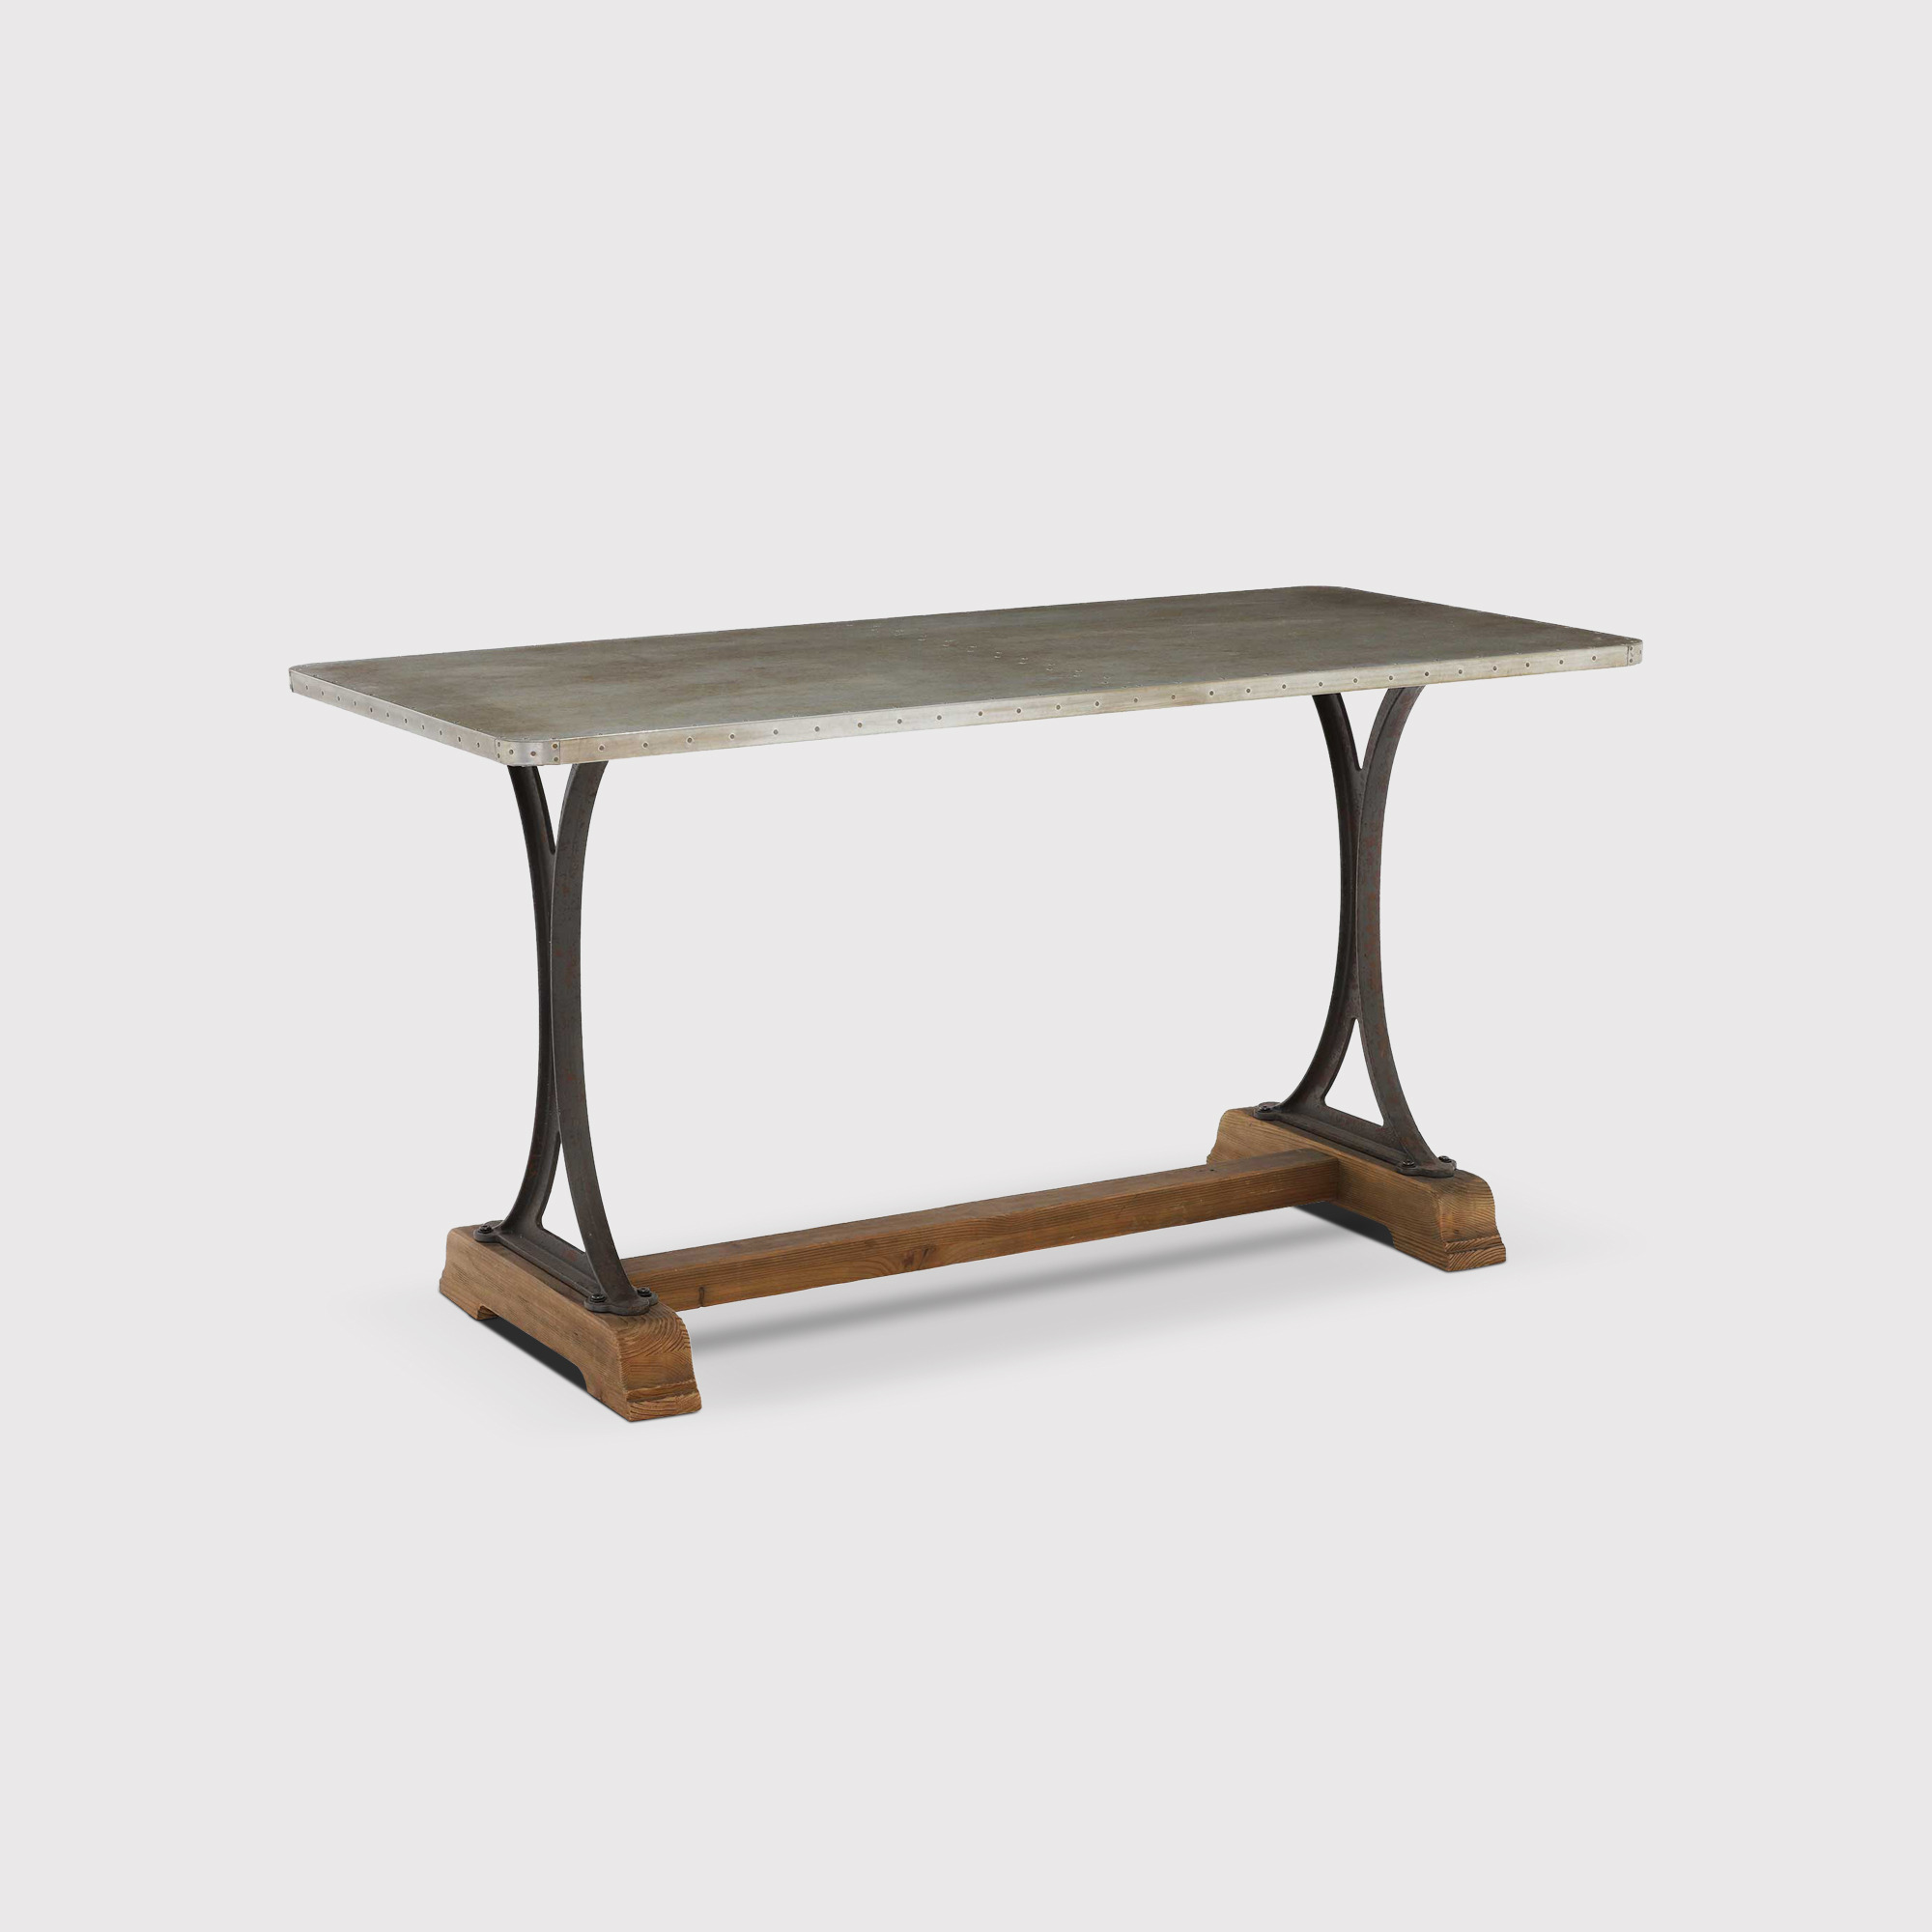 Keeler Dining Table 150X70X78cm, Brown - Barker & Stonehouse - image 1